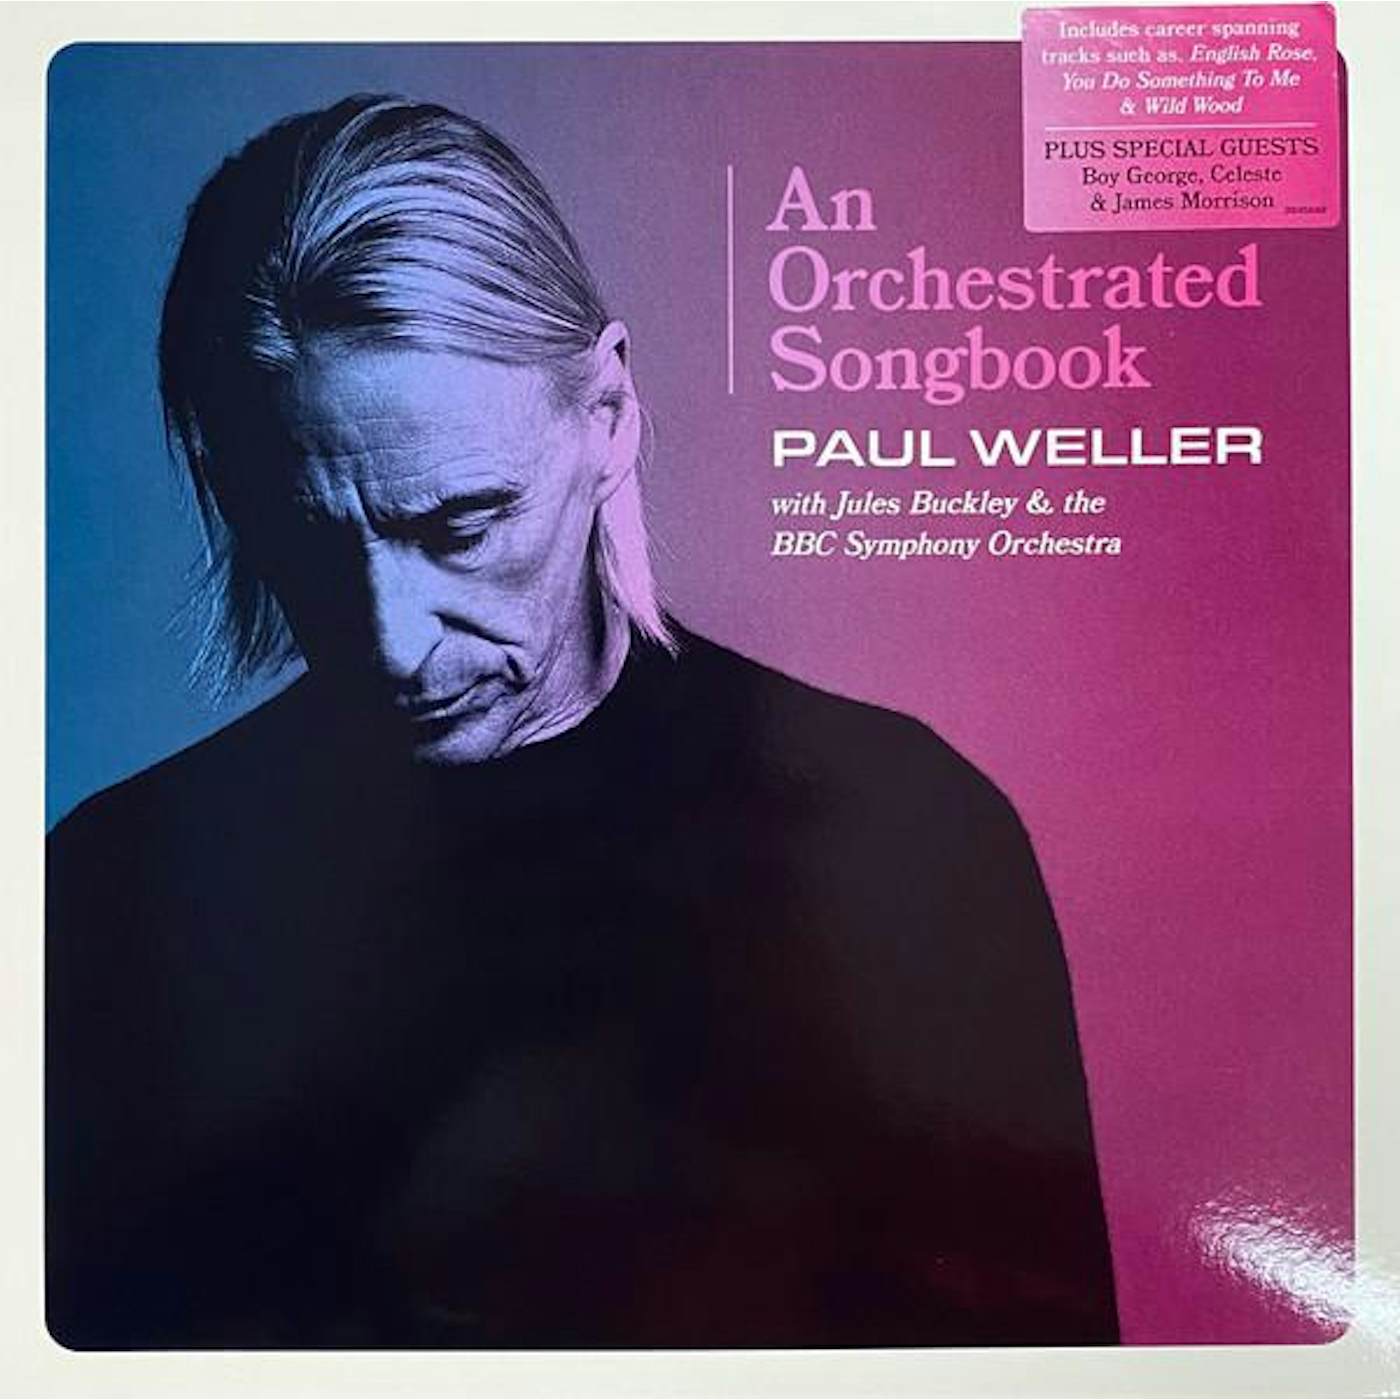 Paul Weller Orchestrated Songbook: With Jules Buckley & Bbc Symphony Orchestra (2Lp) Vinyl Record